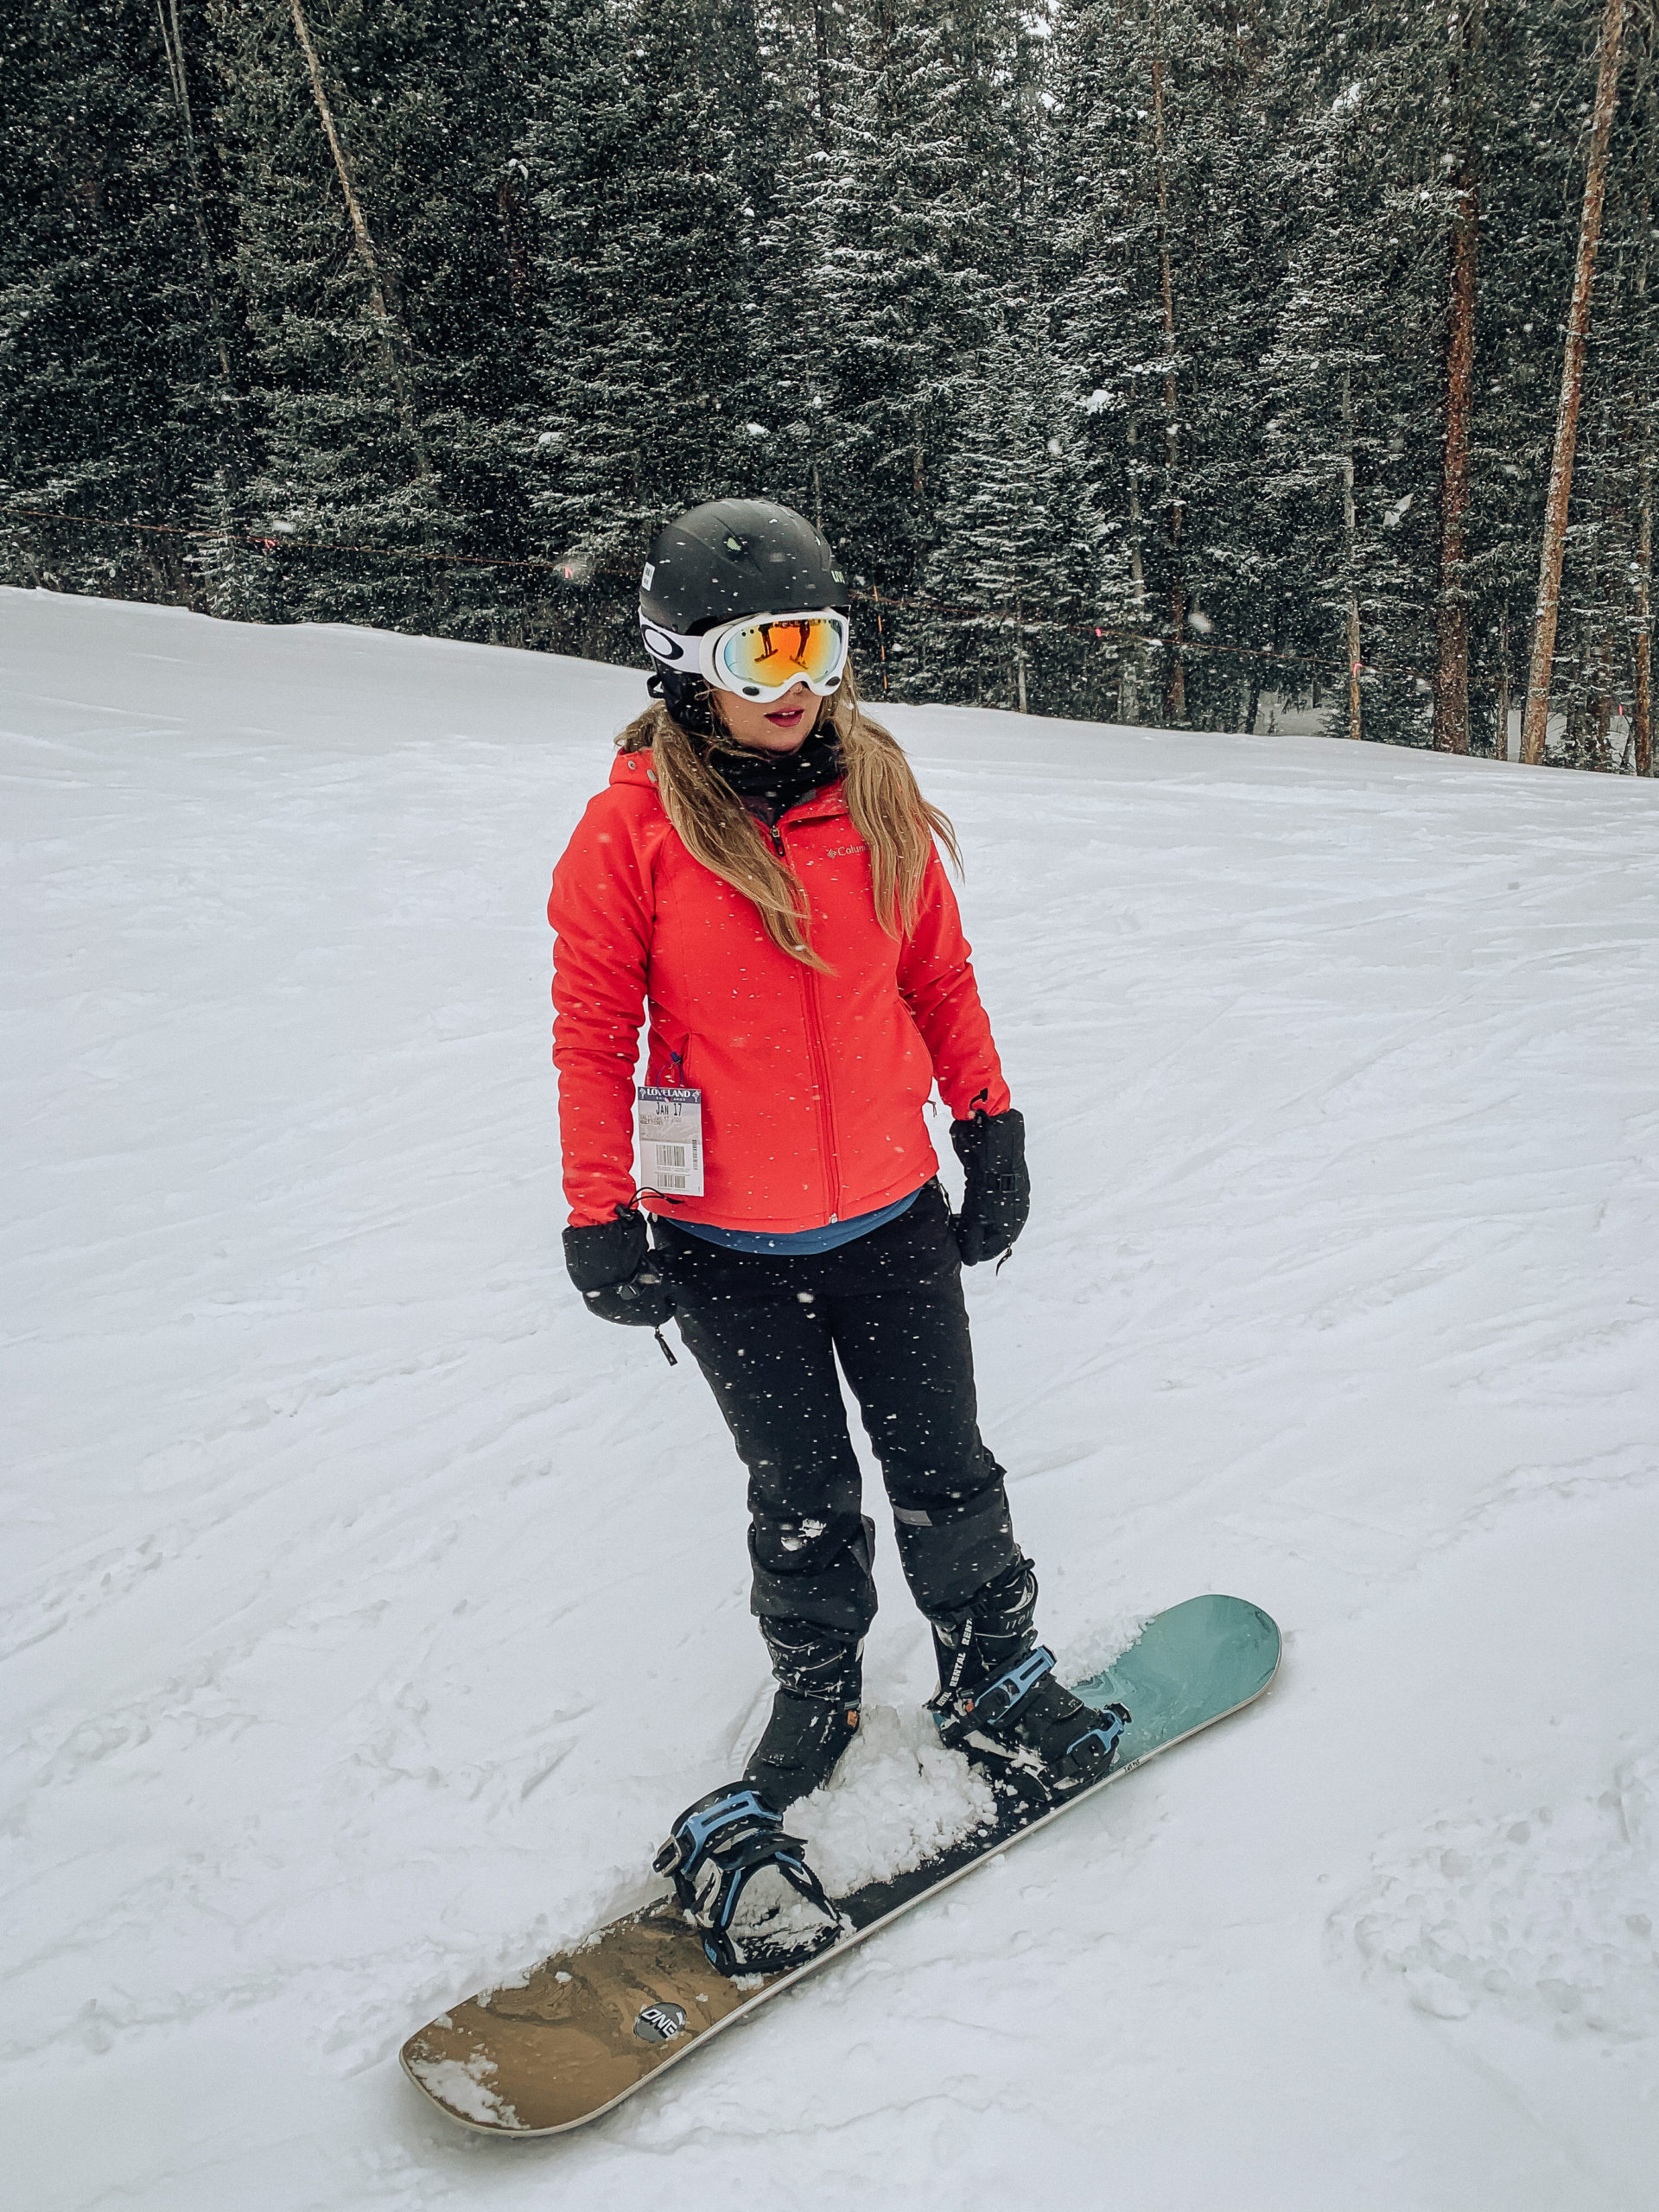 Snowboarding with Toyota | All Things Lovely